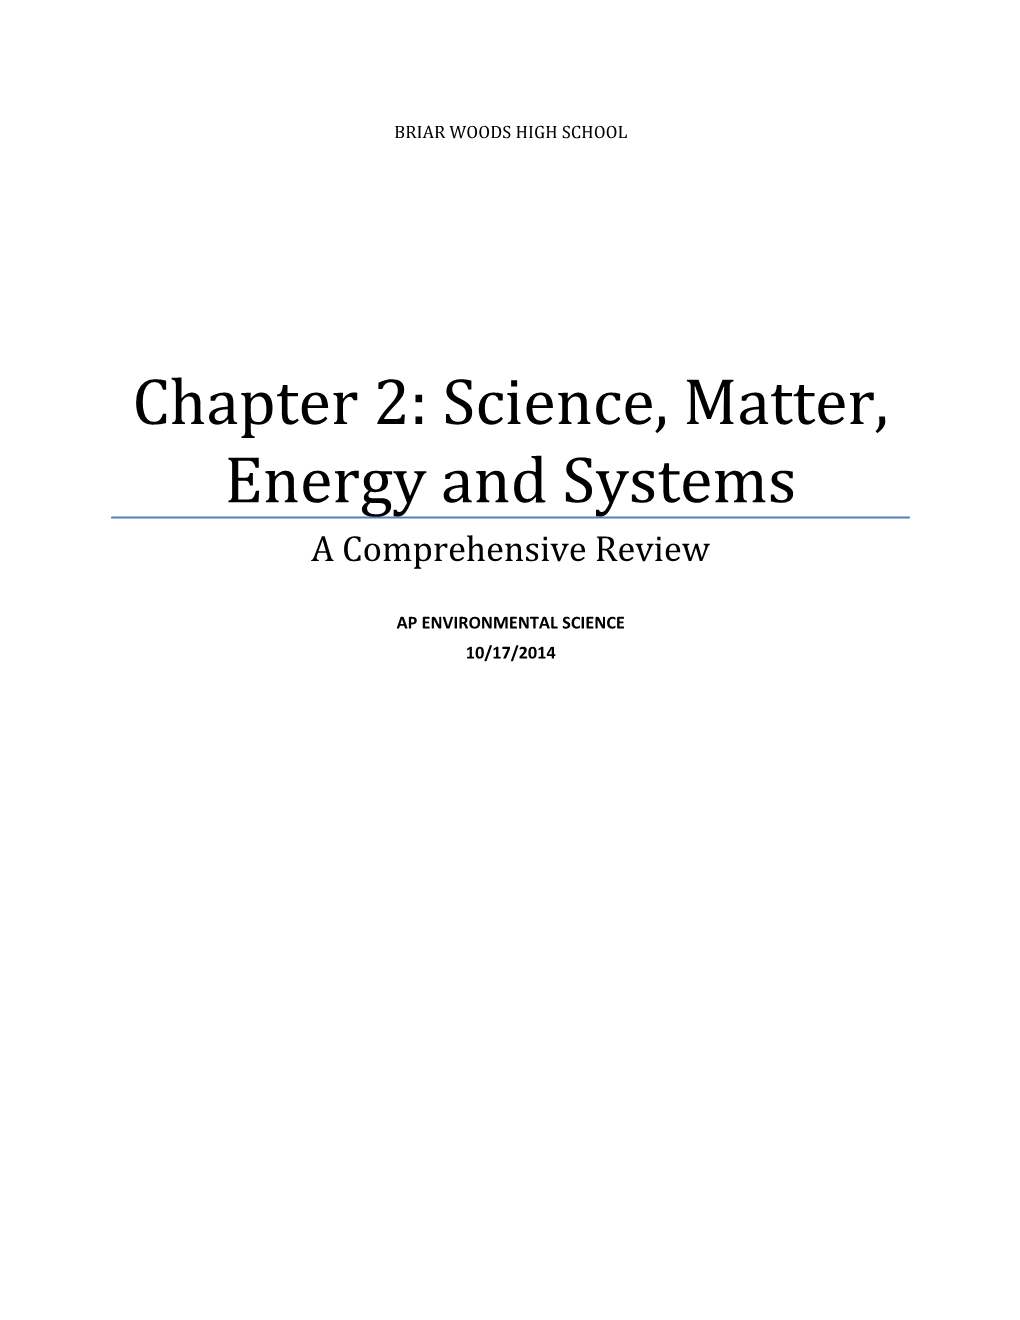 Chapter 2: Science, Matter, Energy and Systems